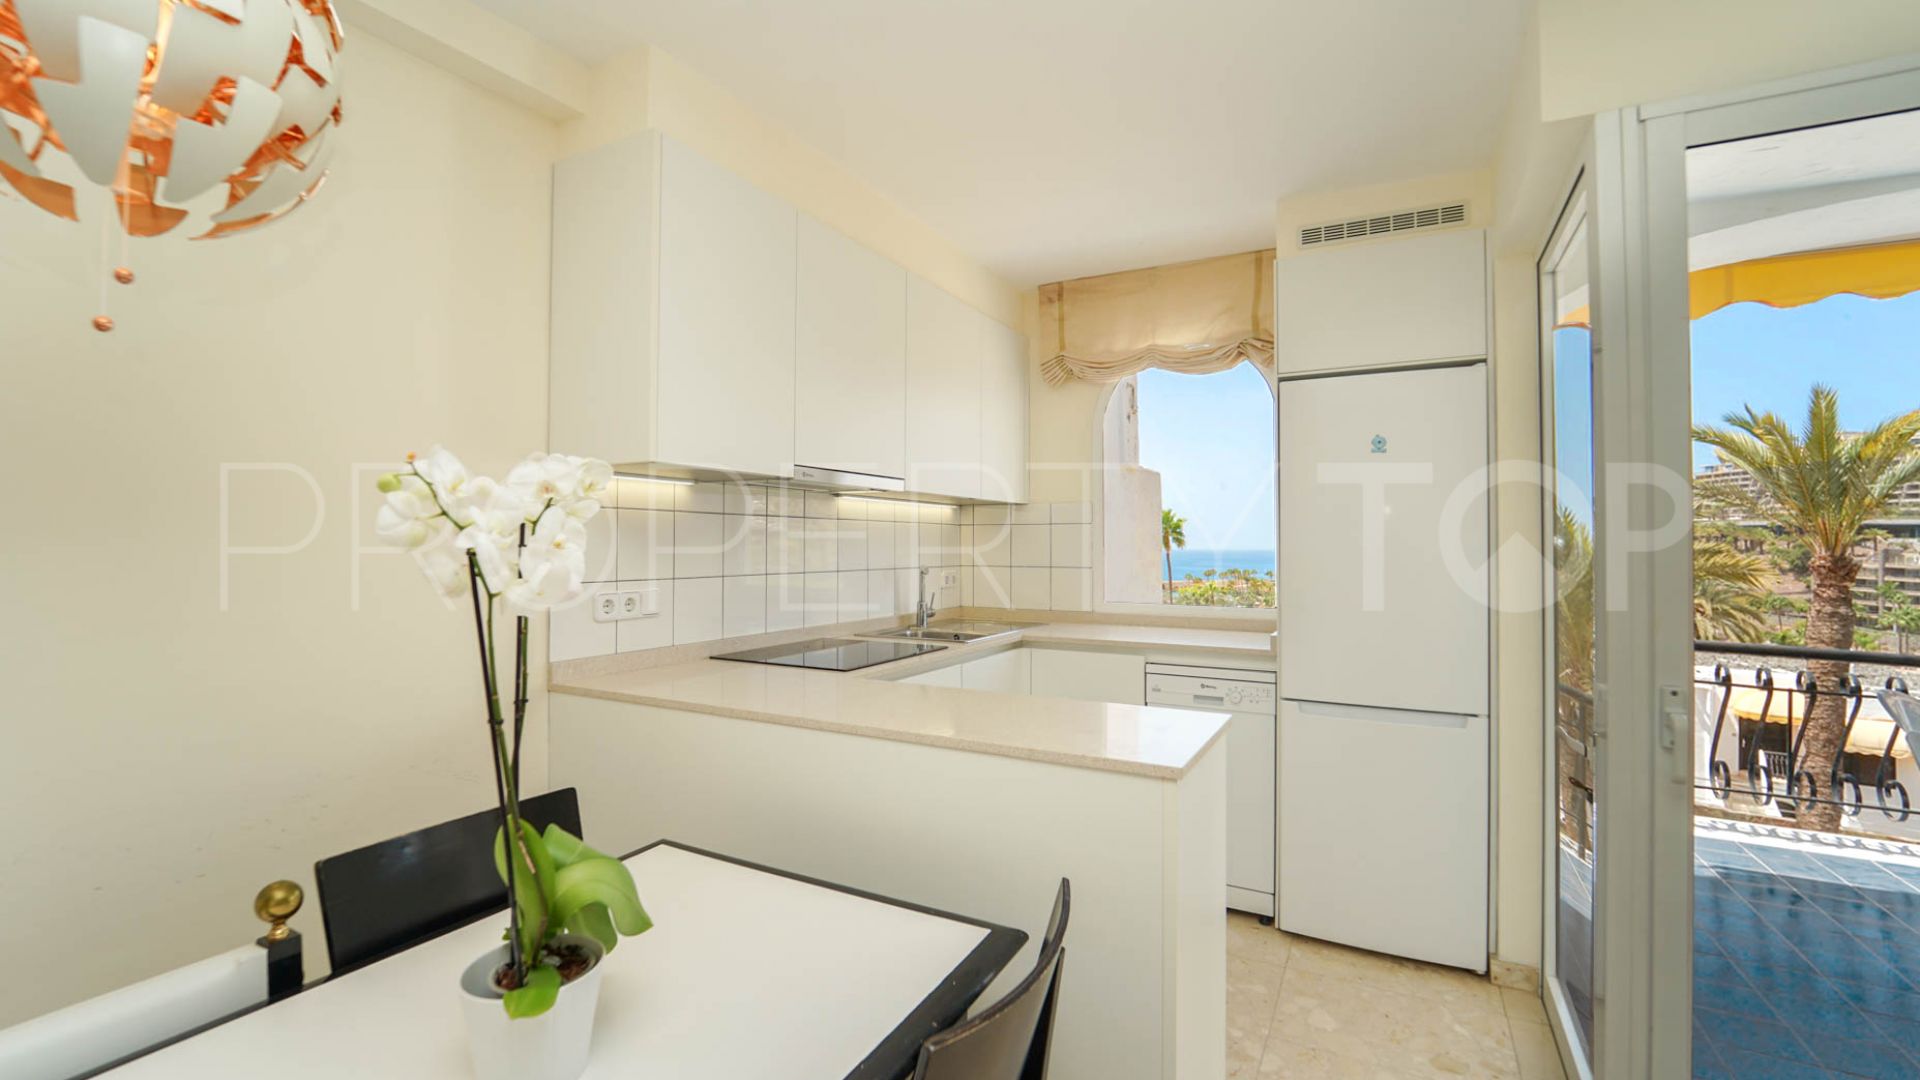 For sale Patalavaca 1 bedroom apartment